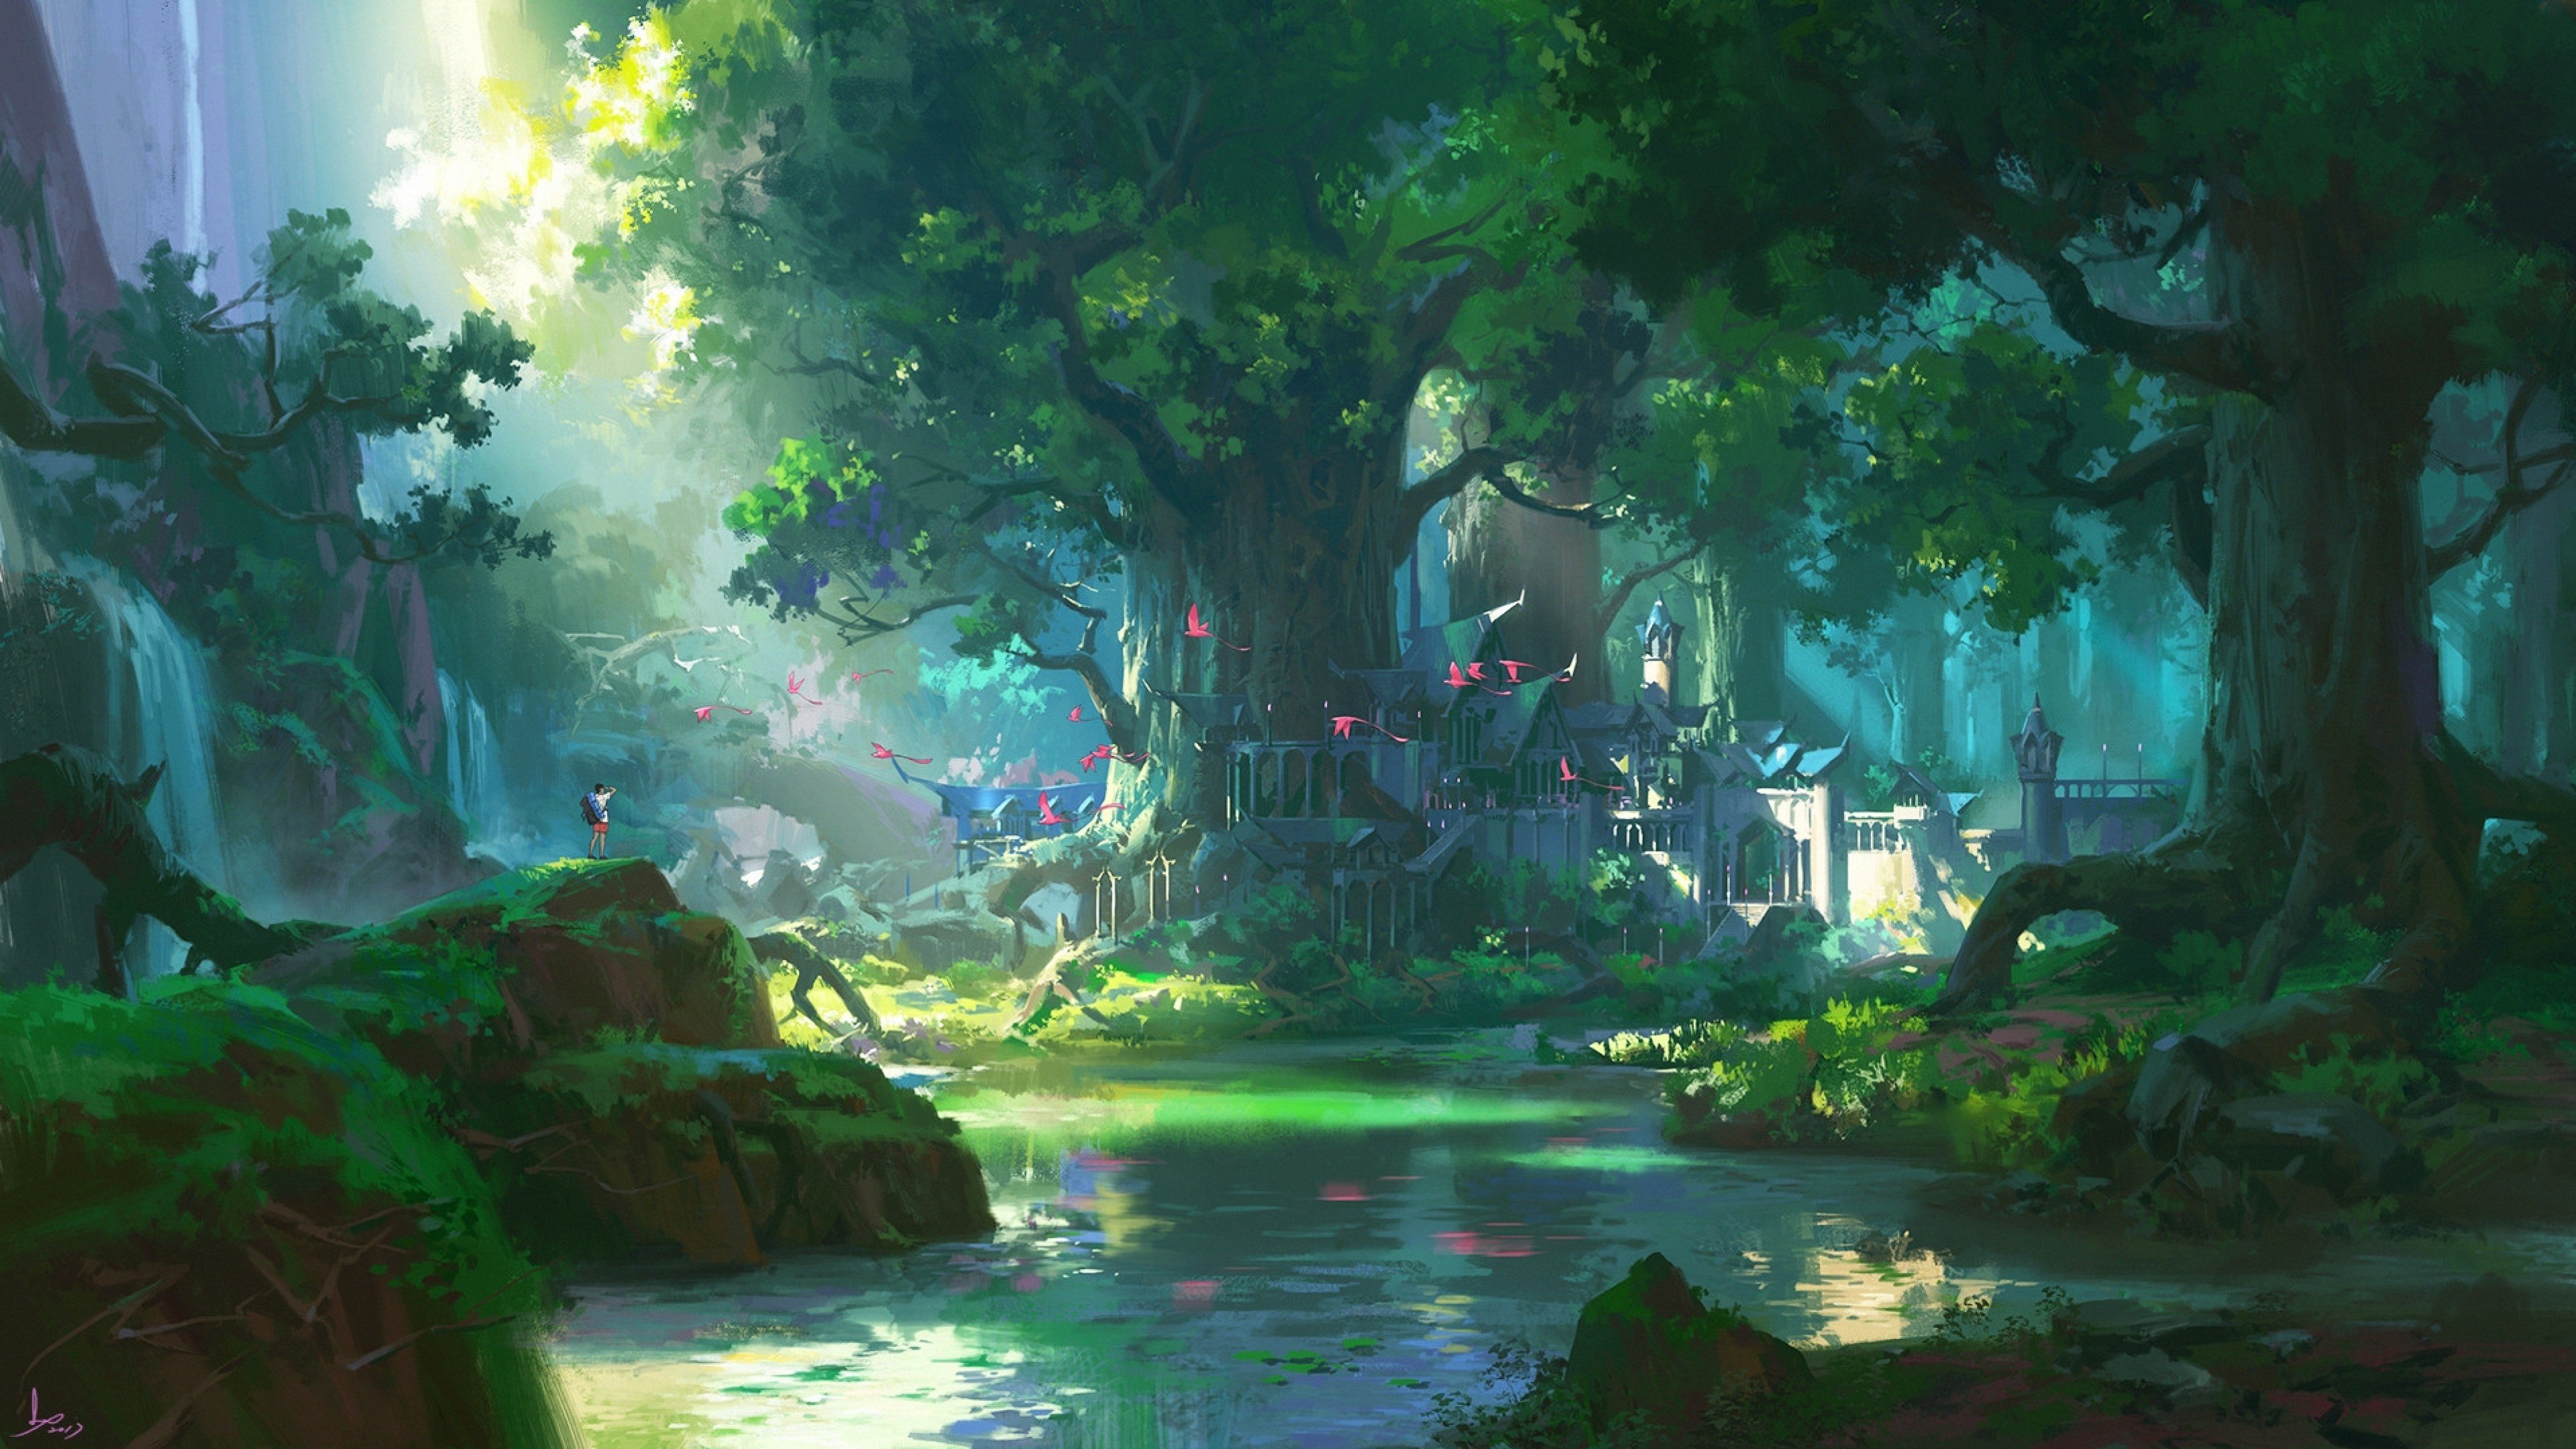 Free Download Anime Forest Scenery 4k Wallpaper 3840x2160 For Your Desktop Mobile Tablet Explore 23 Anime Forest Wallpaper Background Forest Anime Anime Background Forest Anime Forest Wallpaper